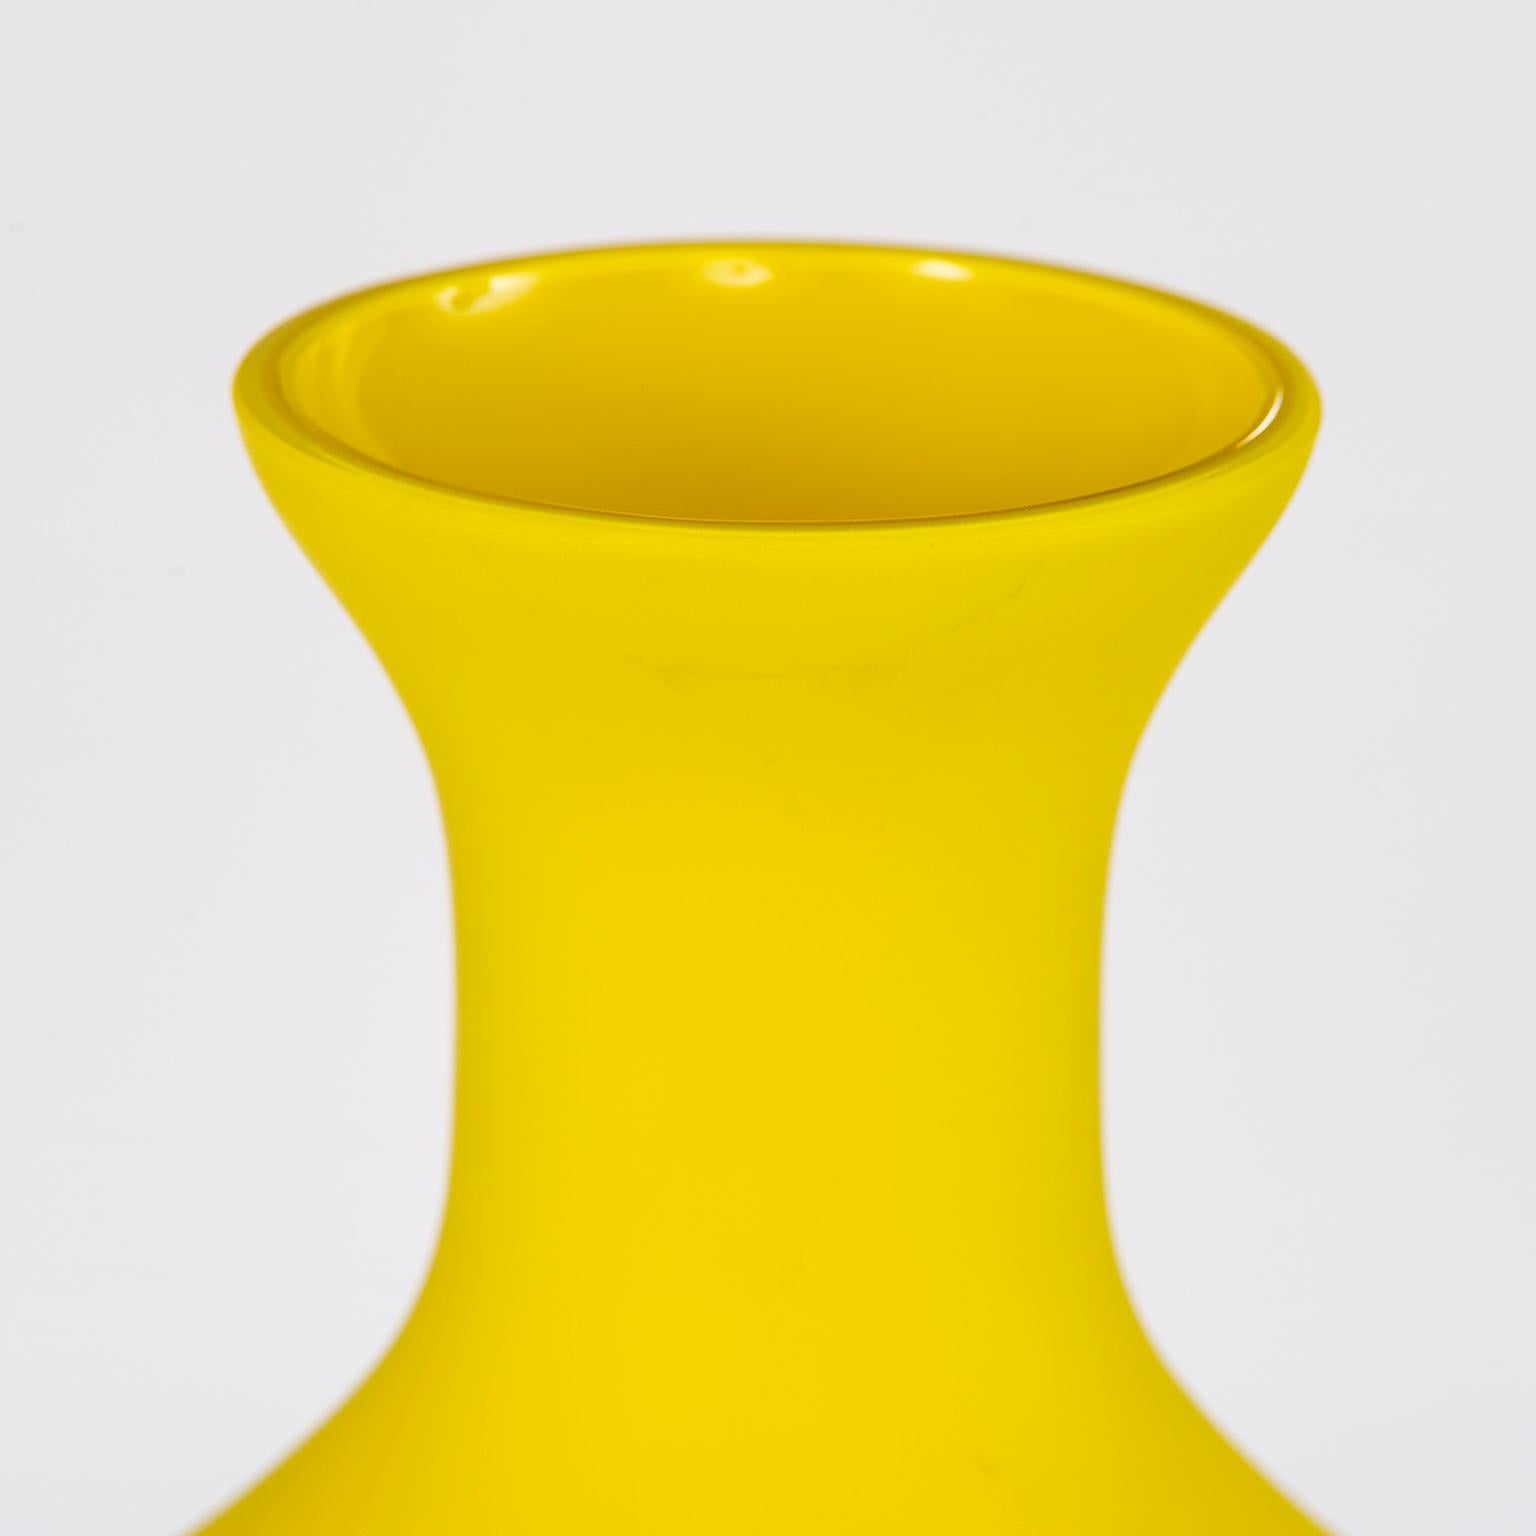 Classic form Murano glass vase attributed to Cenedese, circa 1970s. (We acquired other signed Cenedese pieces in other colors in this shape/style) Matte finish daffodil yellow color and stands 12” high. Excellent vintage condition with no flaws